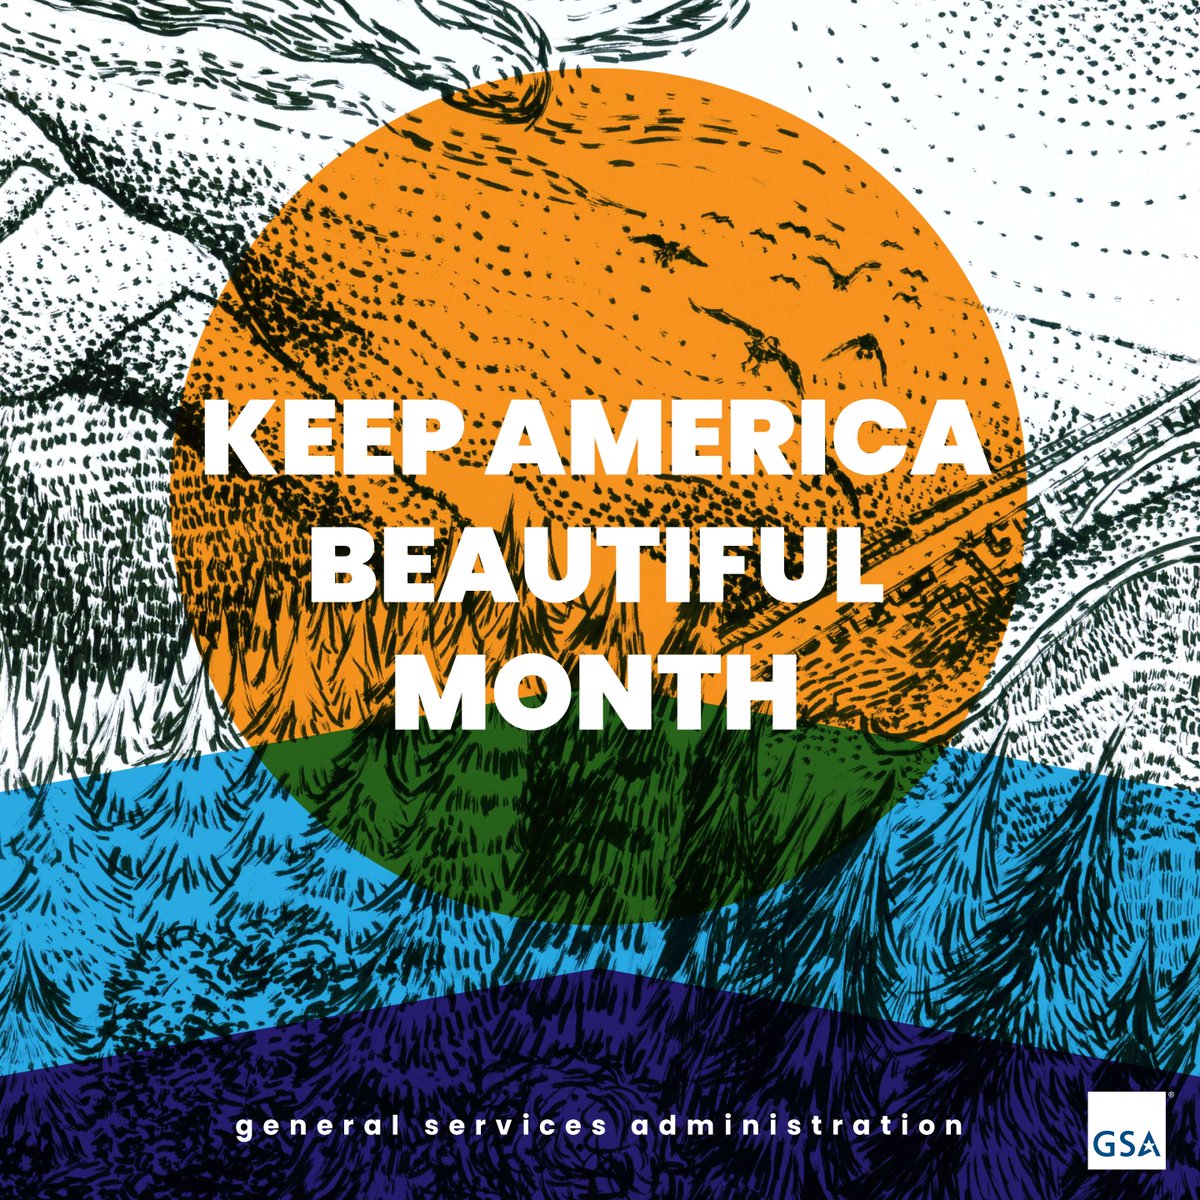 Join @USGSA in celebrating #KeepAmericaBeautifulMonth! From reducing waste to planting trees, let's make sustainable choices that keep our country clean, green, and thriving for generations to come.